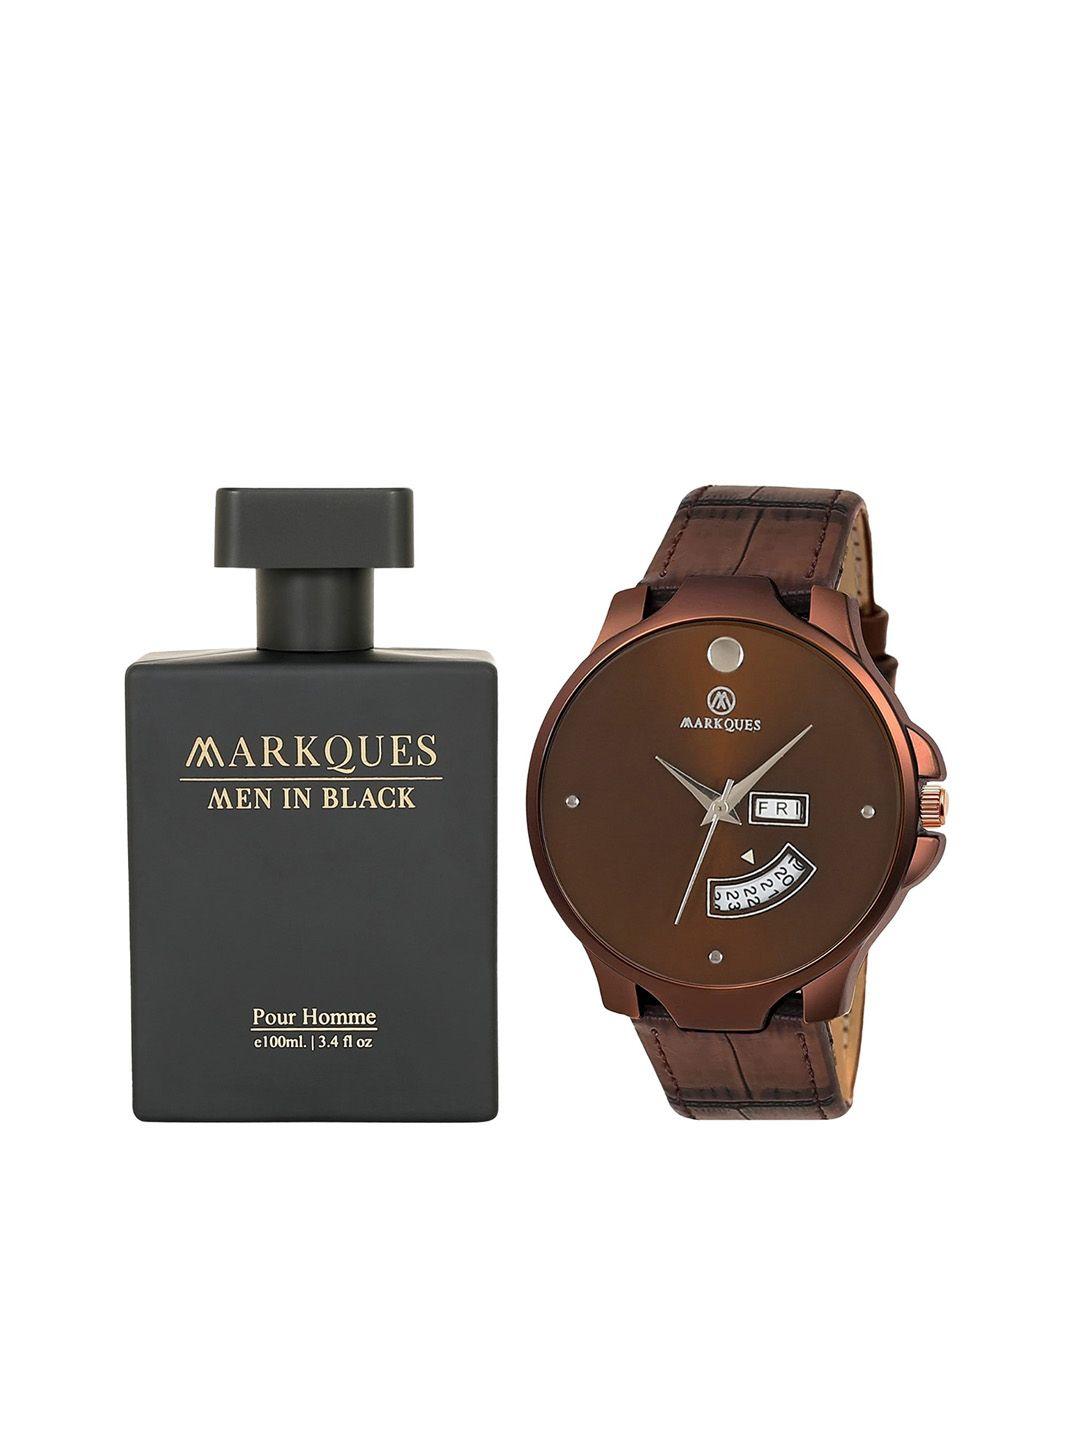 markques men watch with perfume accessory gift set